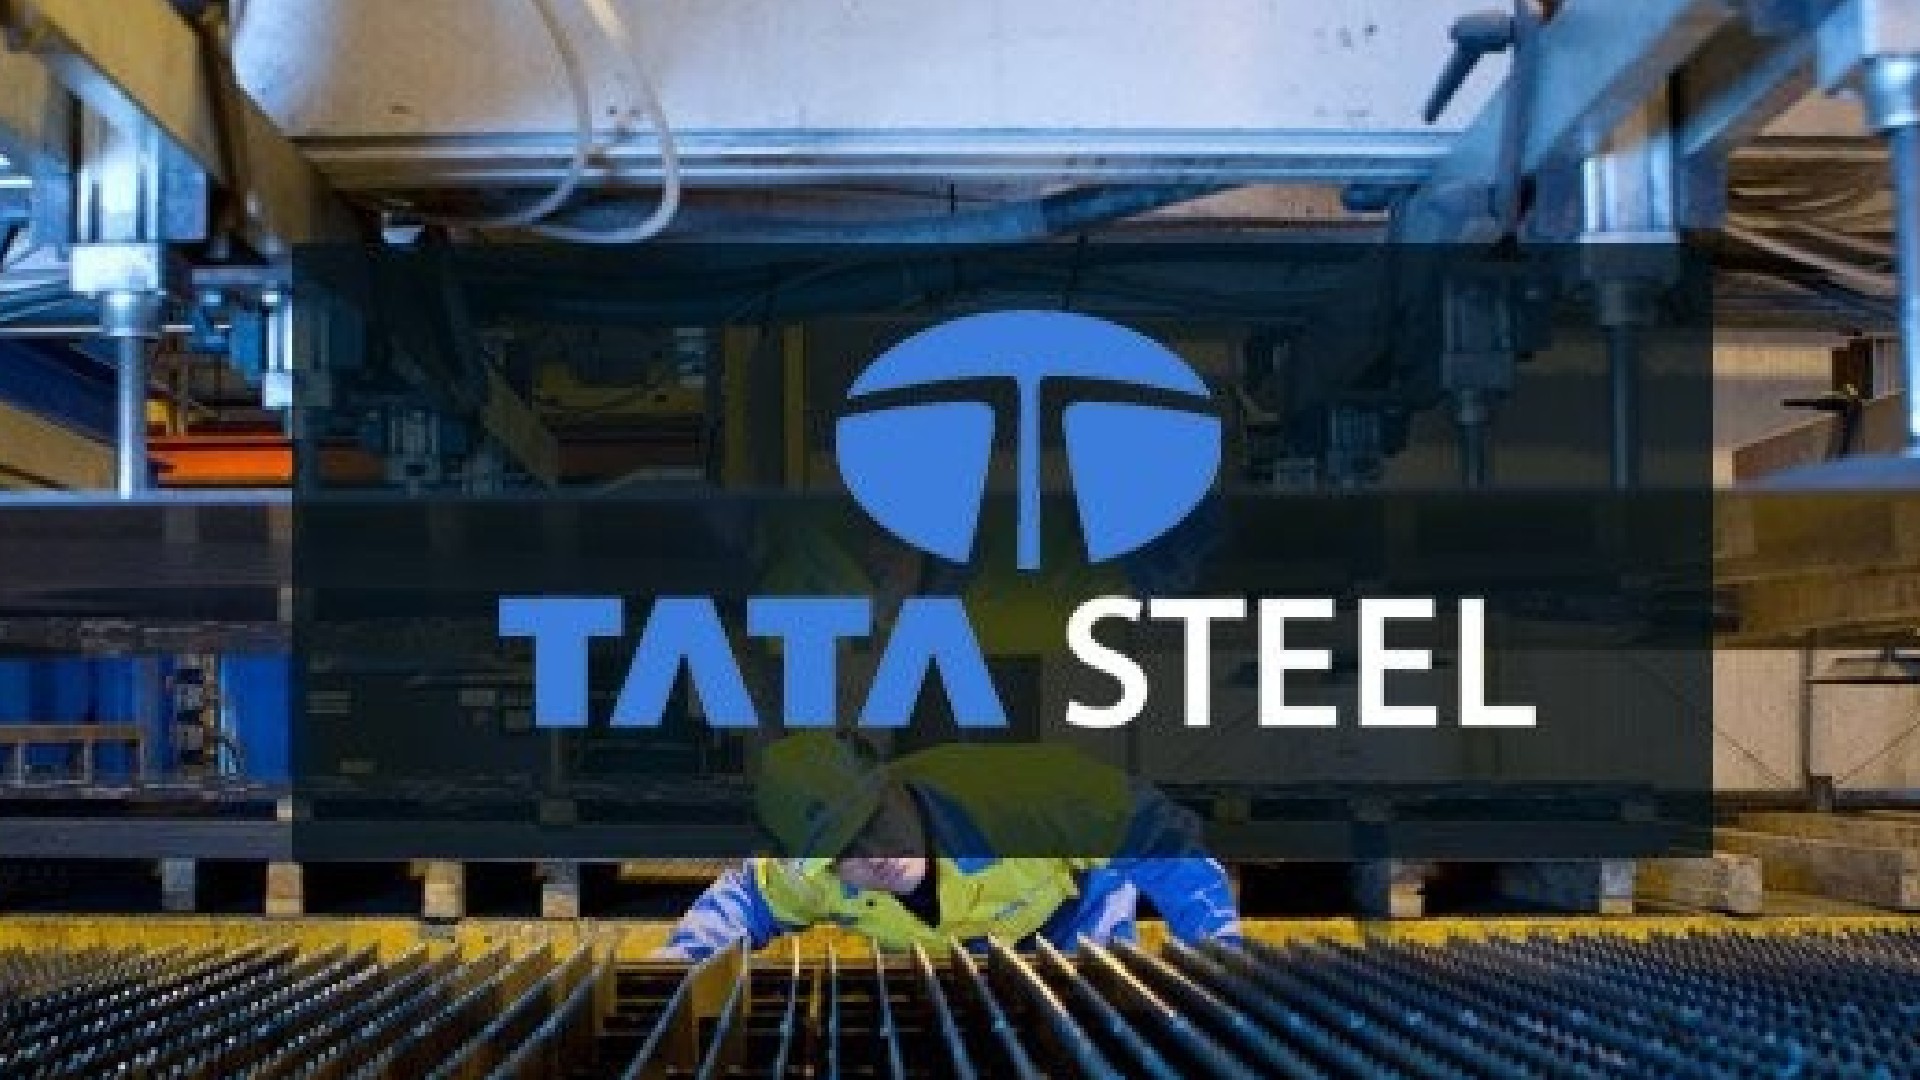 Tata Steel Will Give 100% Salary To Covid Victims Till Retirement, Free Education For Frontline Workers